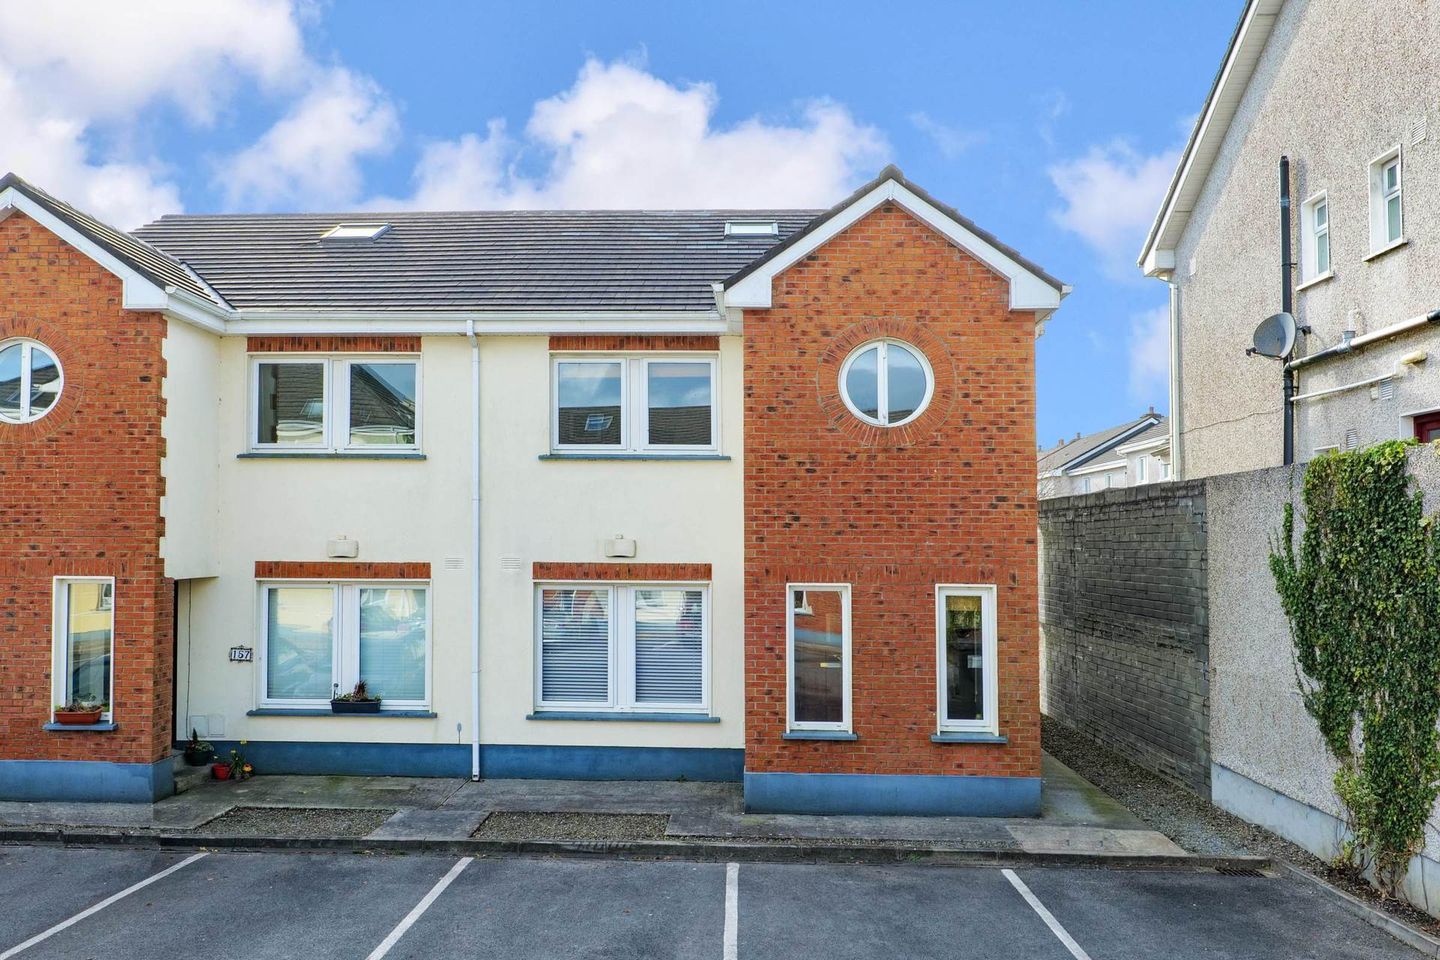 159 Manor Court, Knocknacarra, Co. Galway, H91PD73